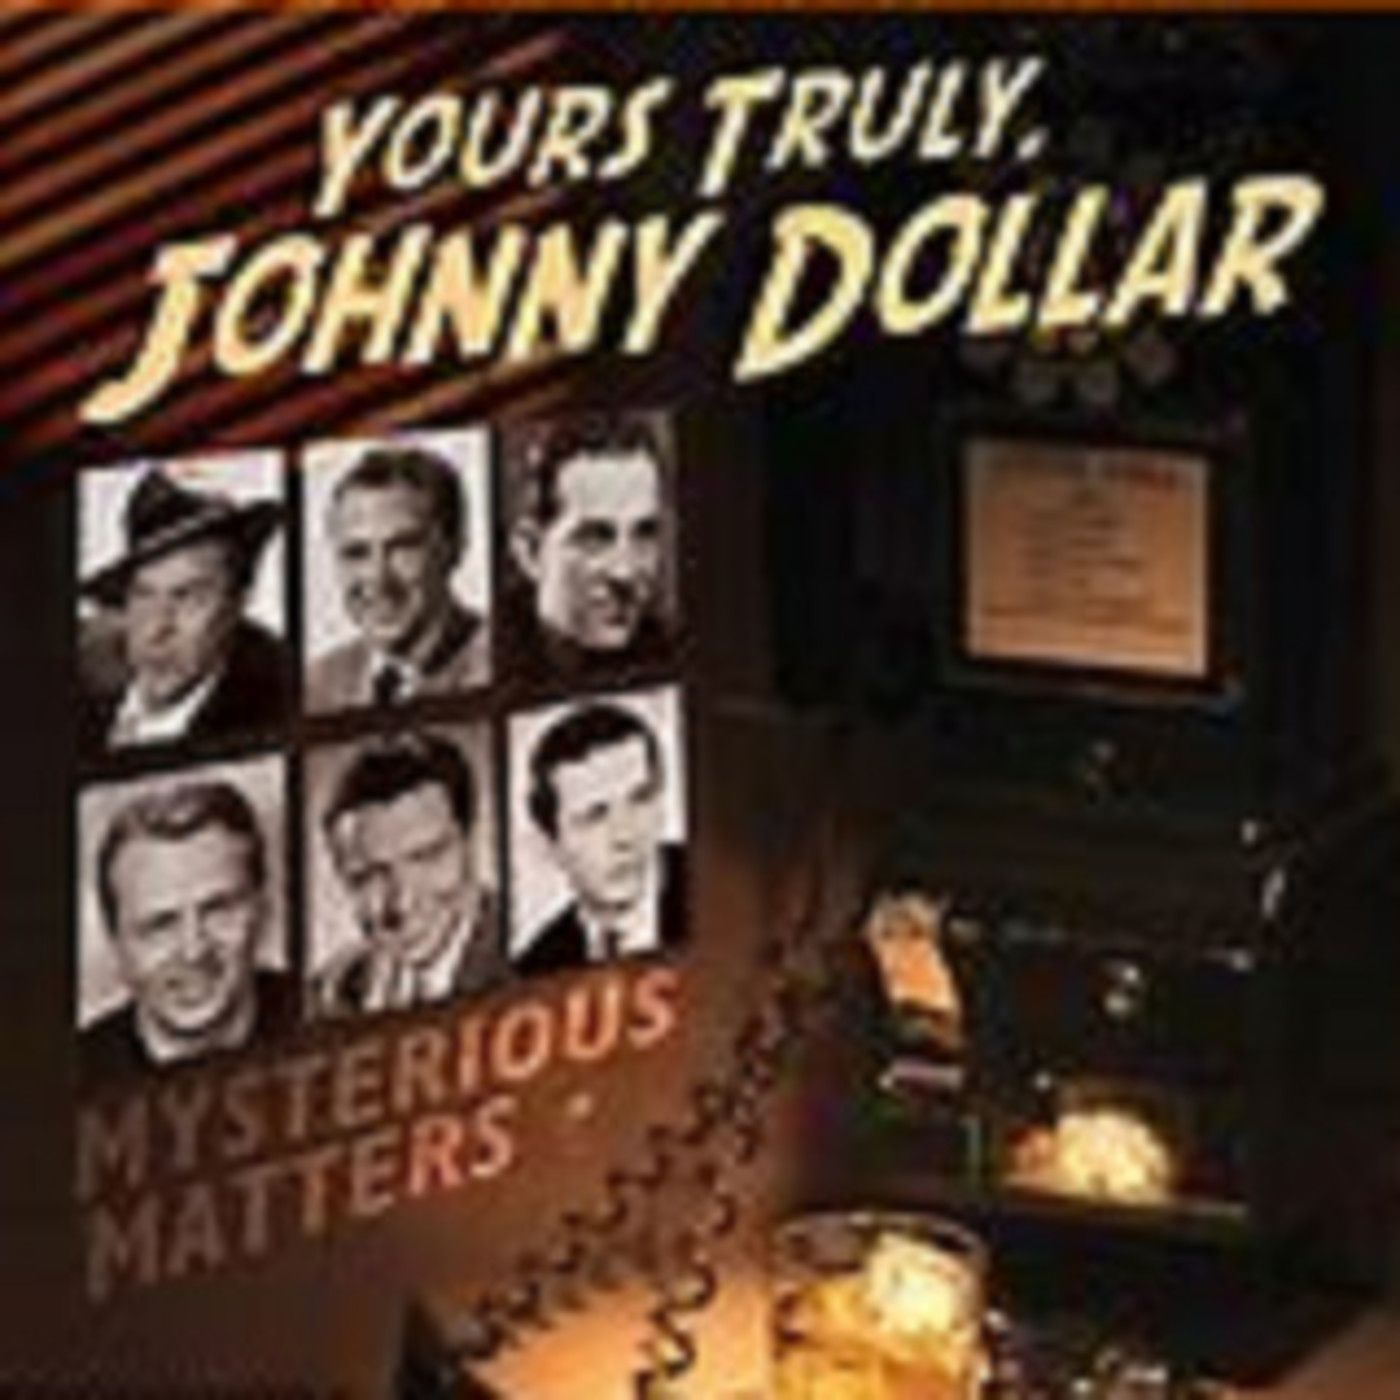 Yours Truly, Johnny Dollar - 090460, episode 704 - The Killer Kin Matter